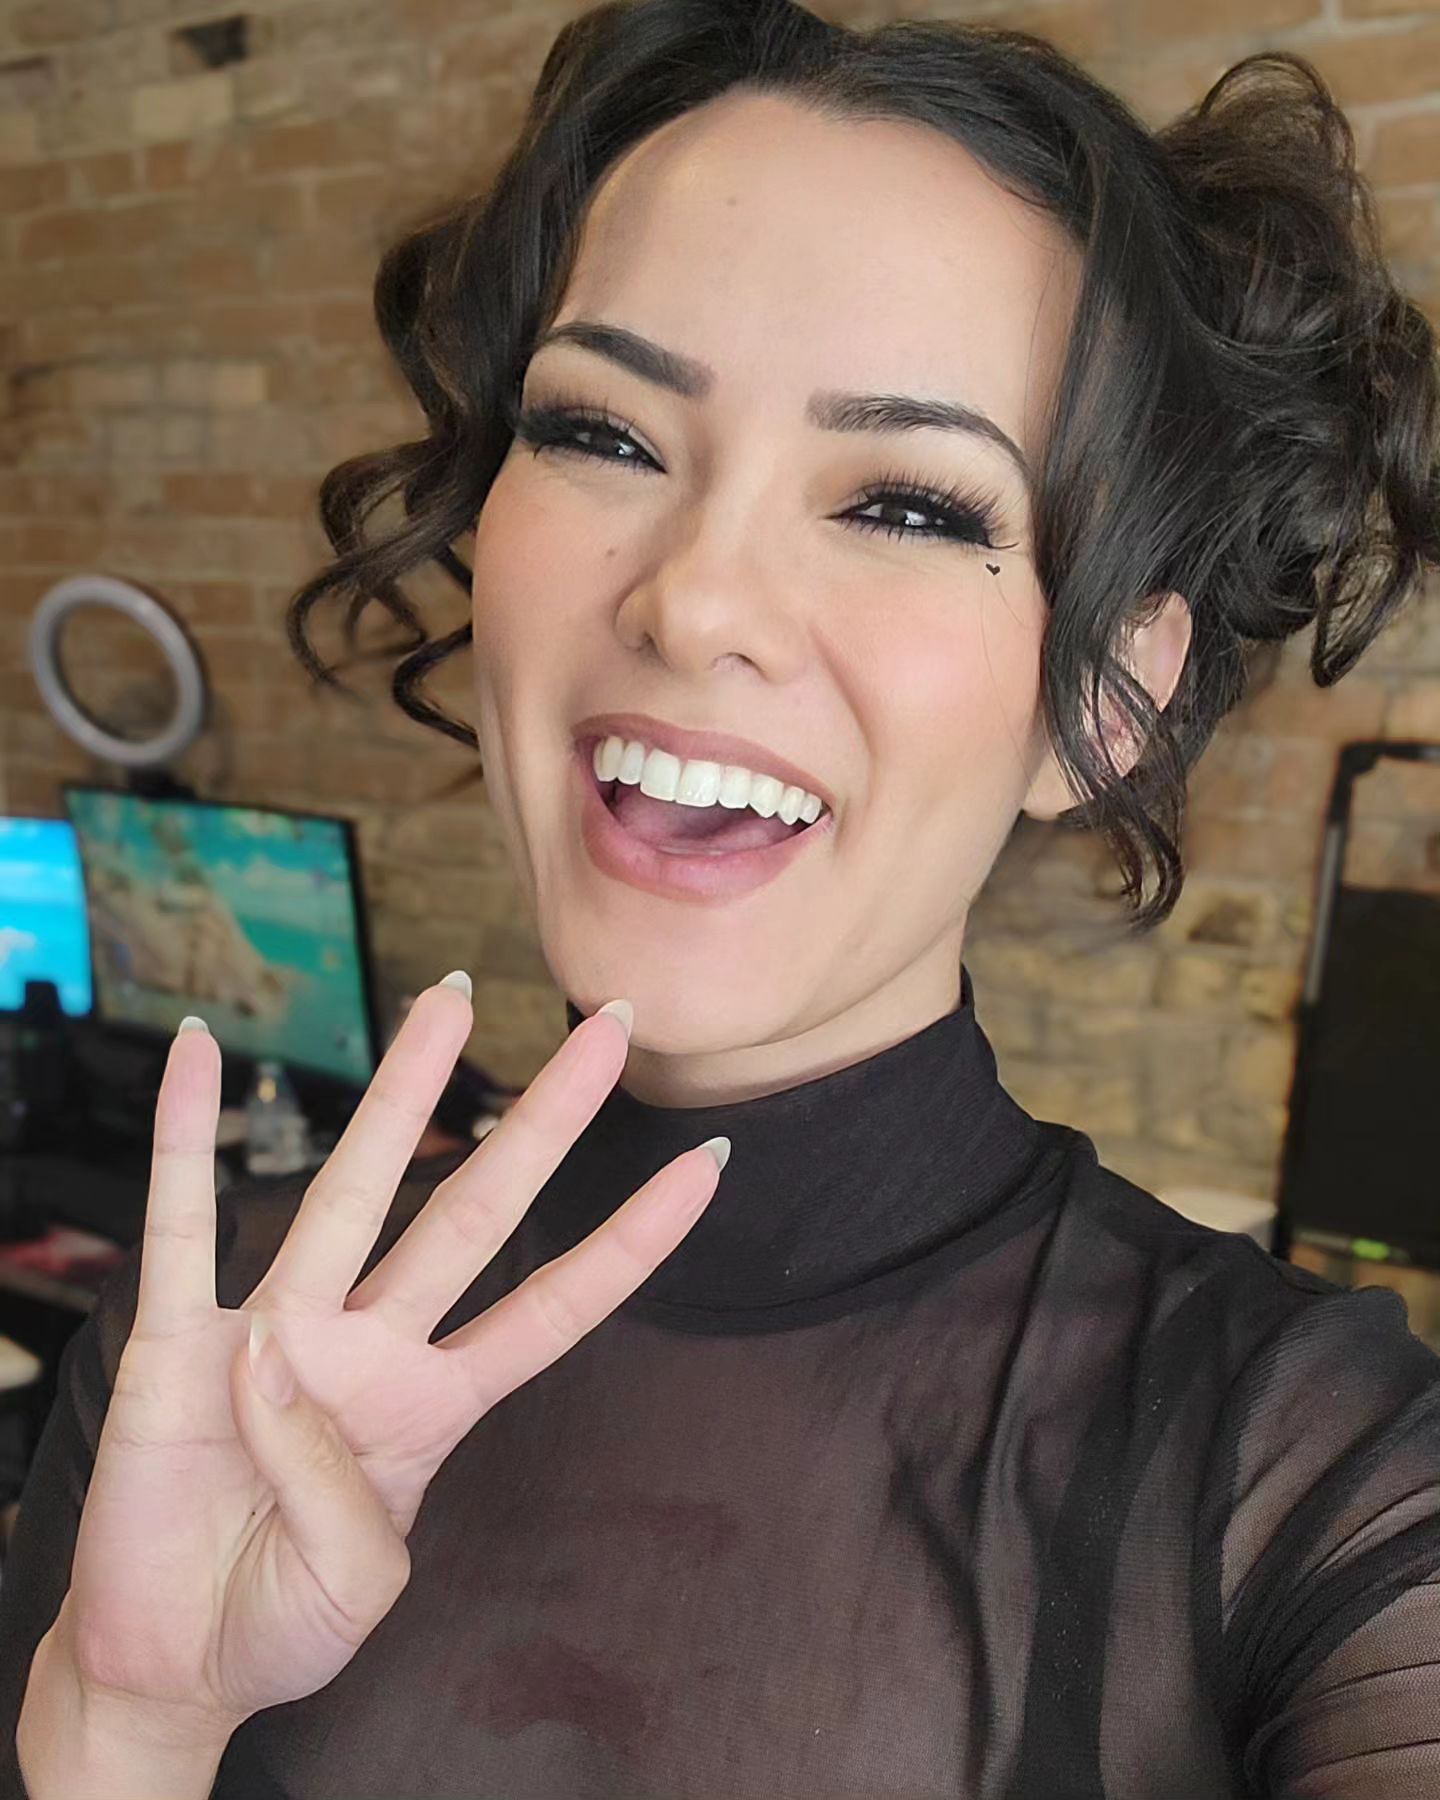 Celebrating 4 years on @twitch today!!! Come say hi! Twitch.tv/JoanieBrosas